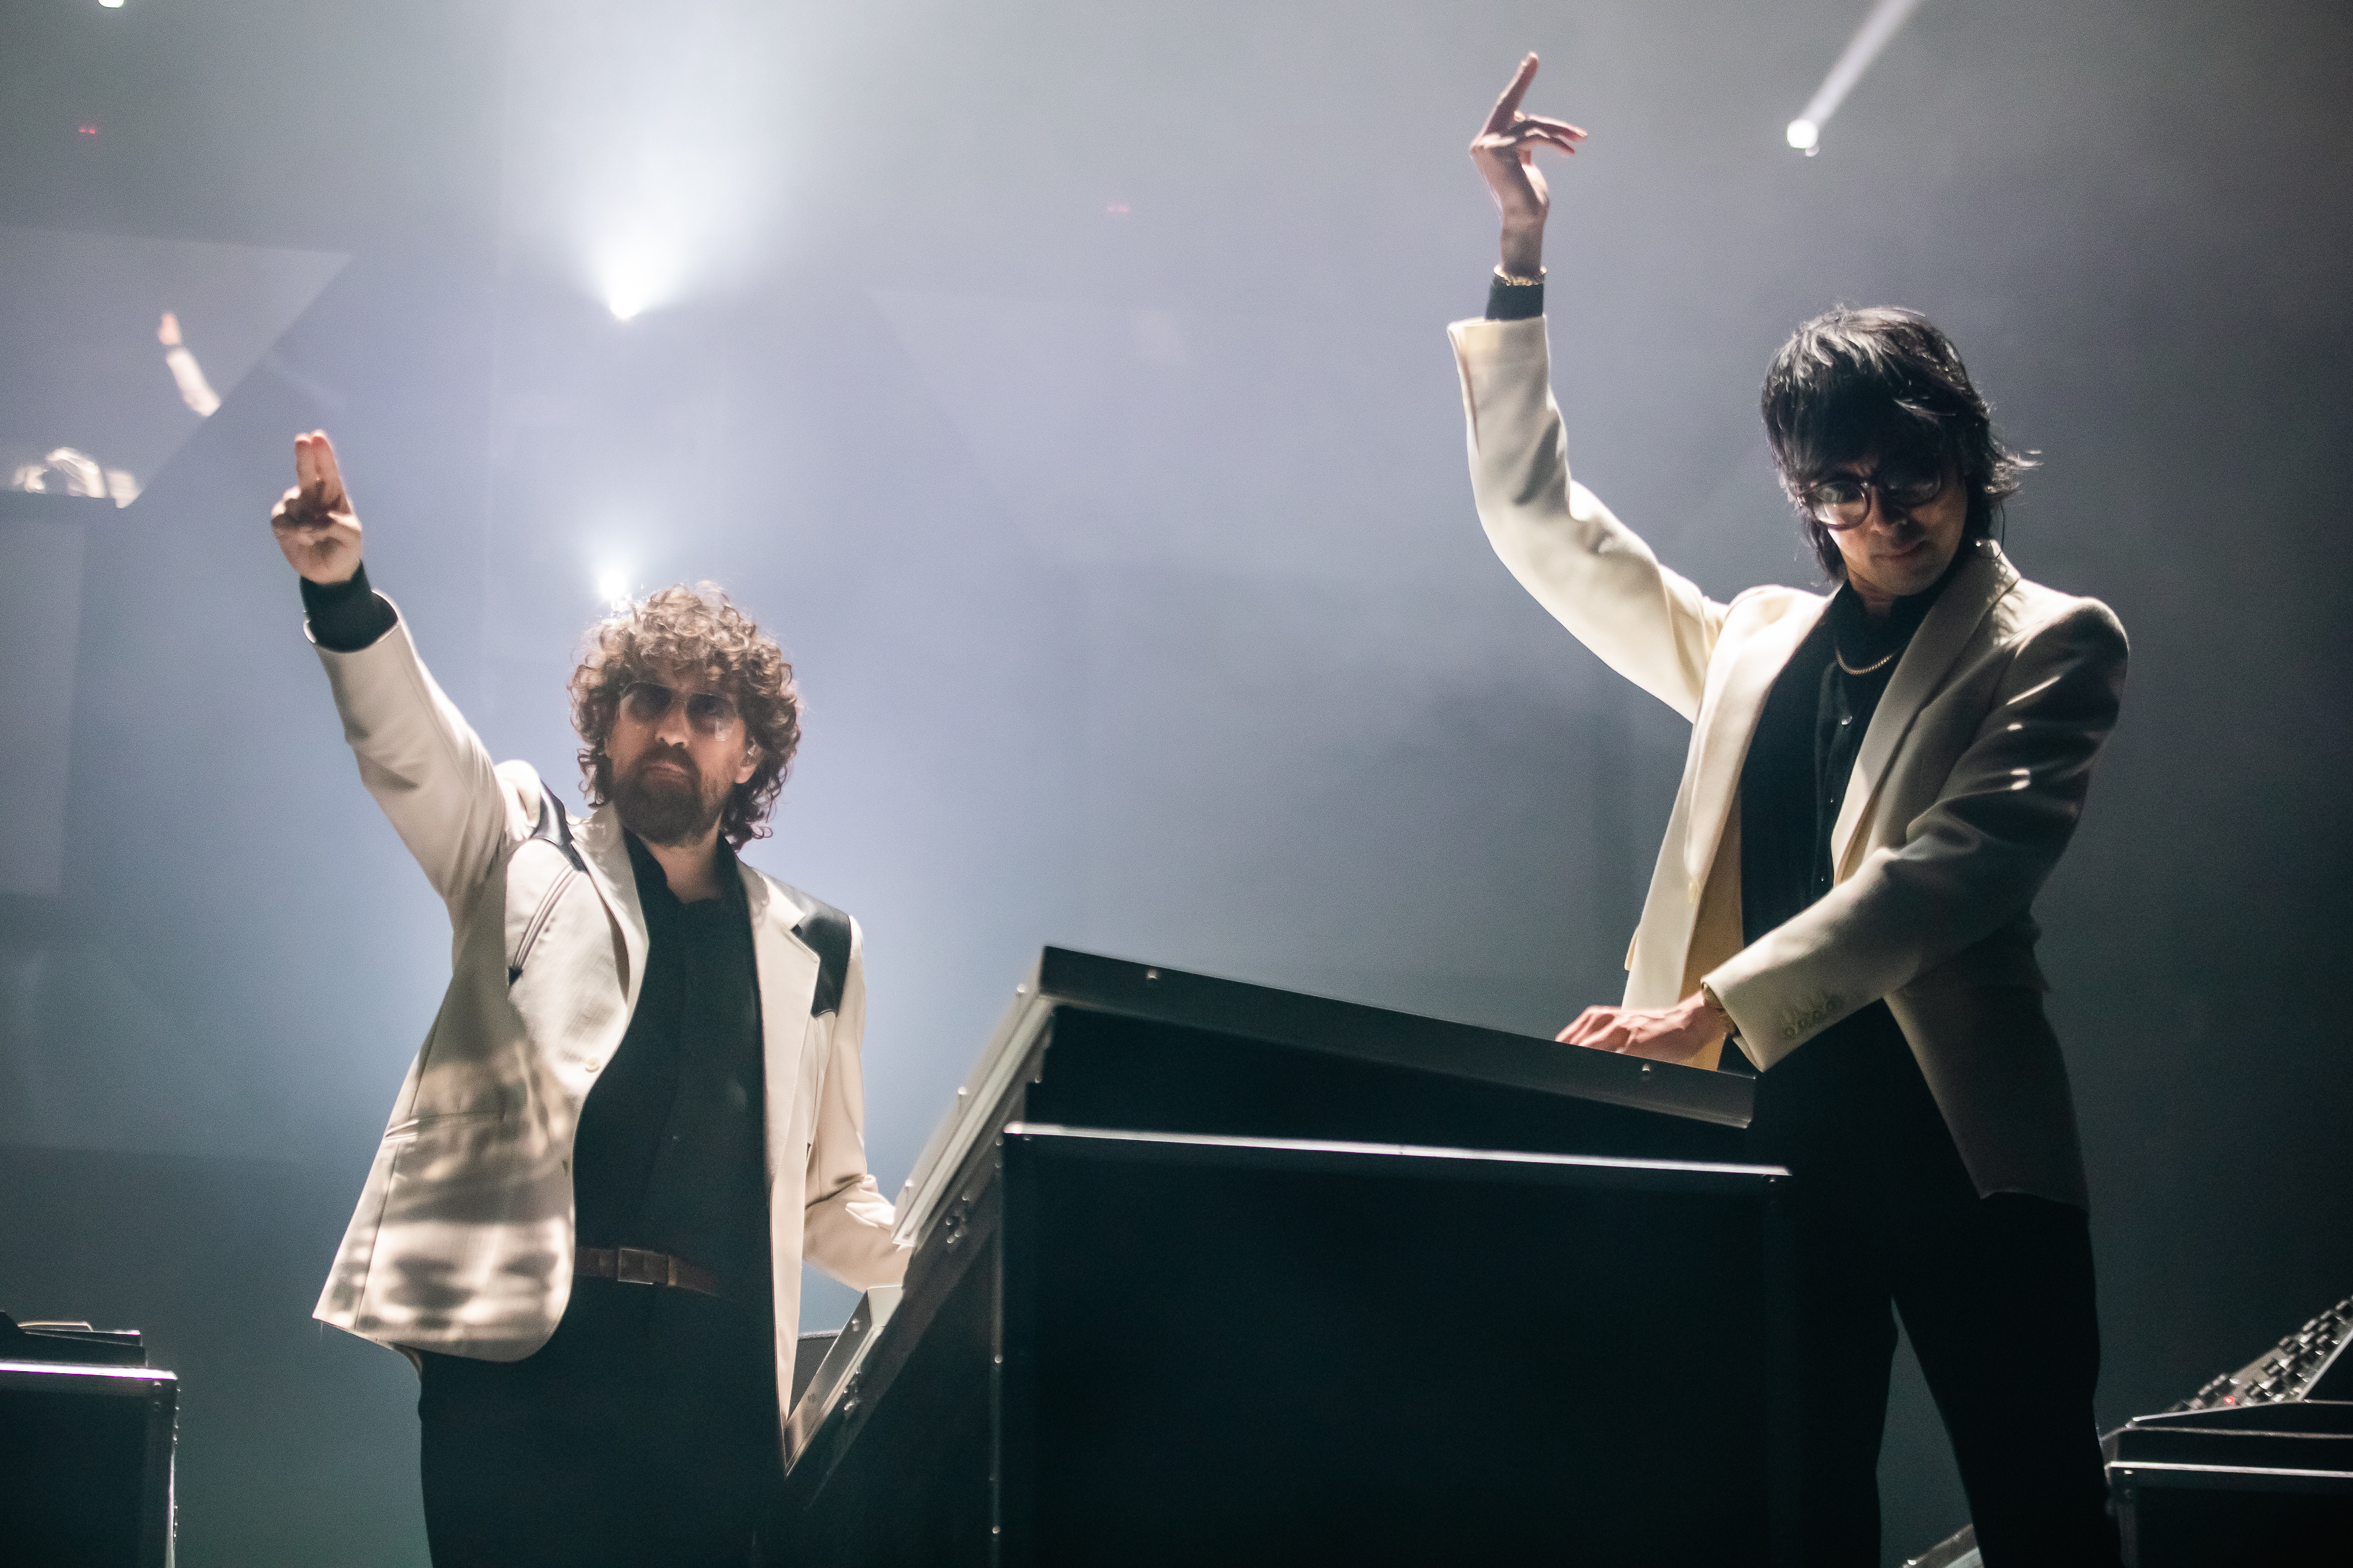 Two musicians in white jackets perform on stage, one pointing up, the other at a keyboard, amidst dramatic lighting.